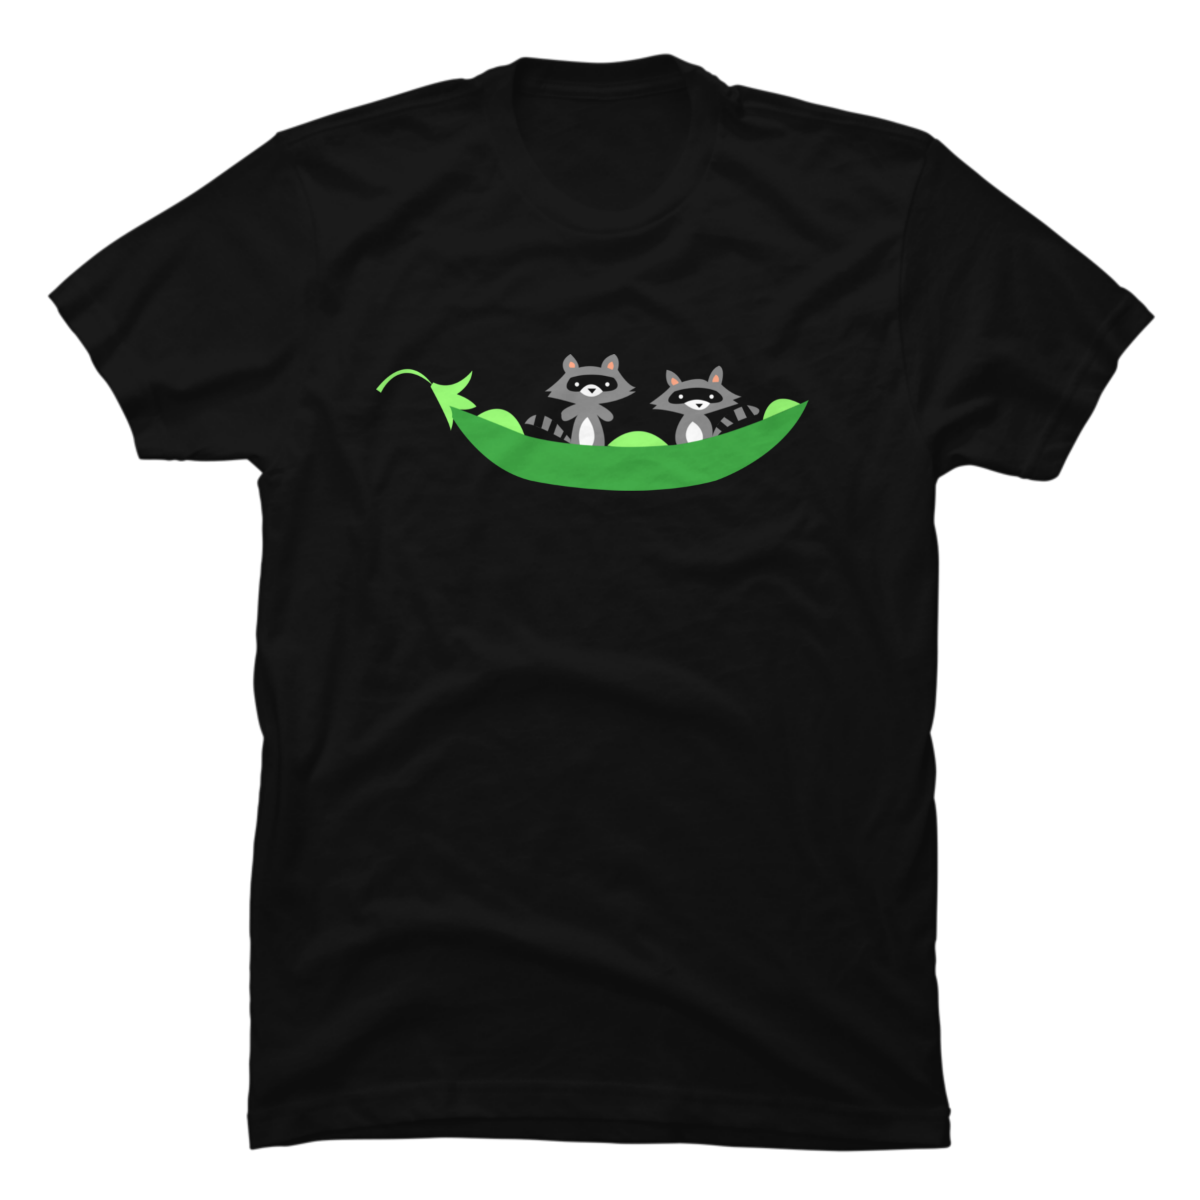 two peas in a pod shirt